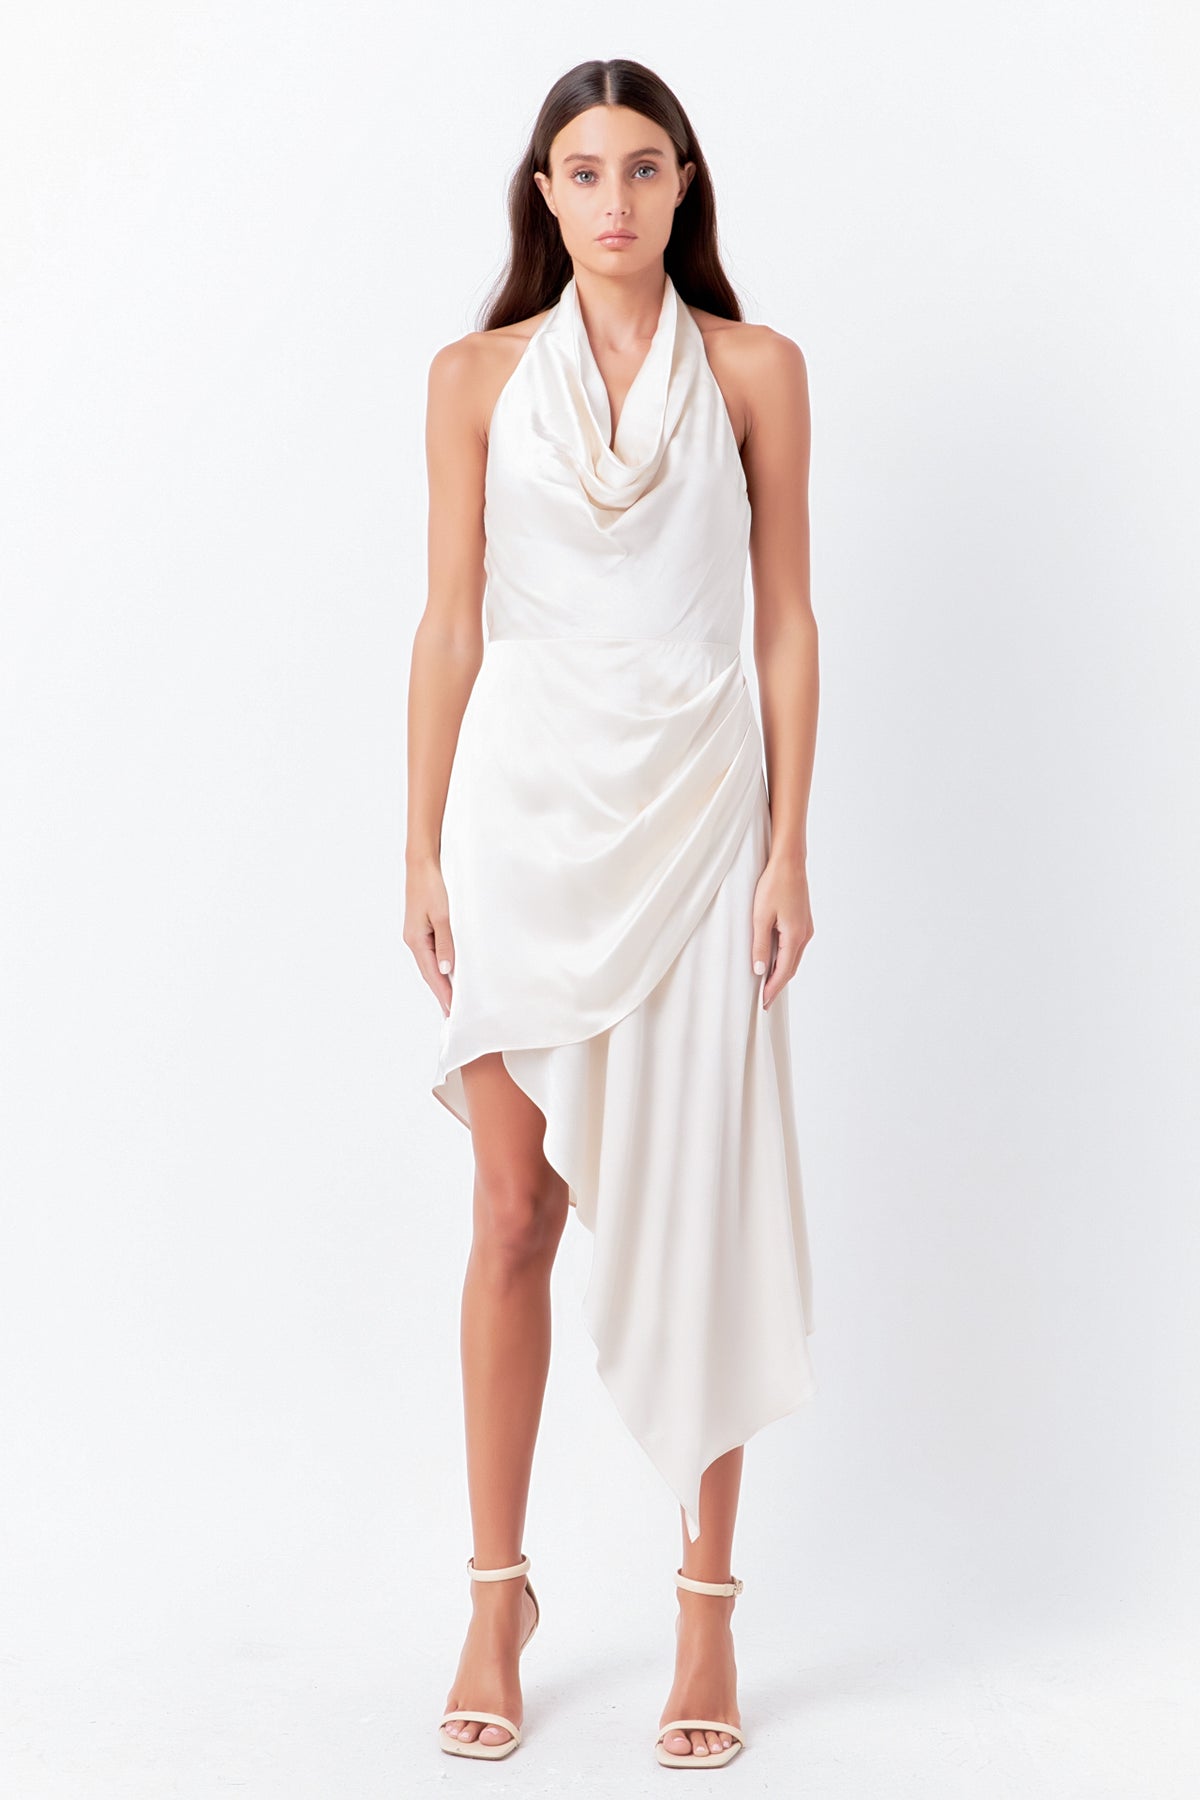 ENDLESS ROSE - Halter Neck Asymmetric Satin Dress - DRESSES available at Objectrare